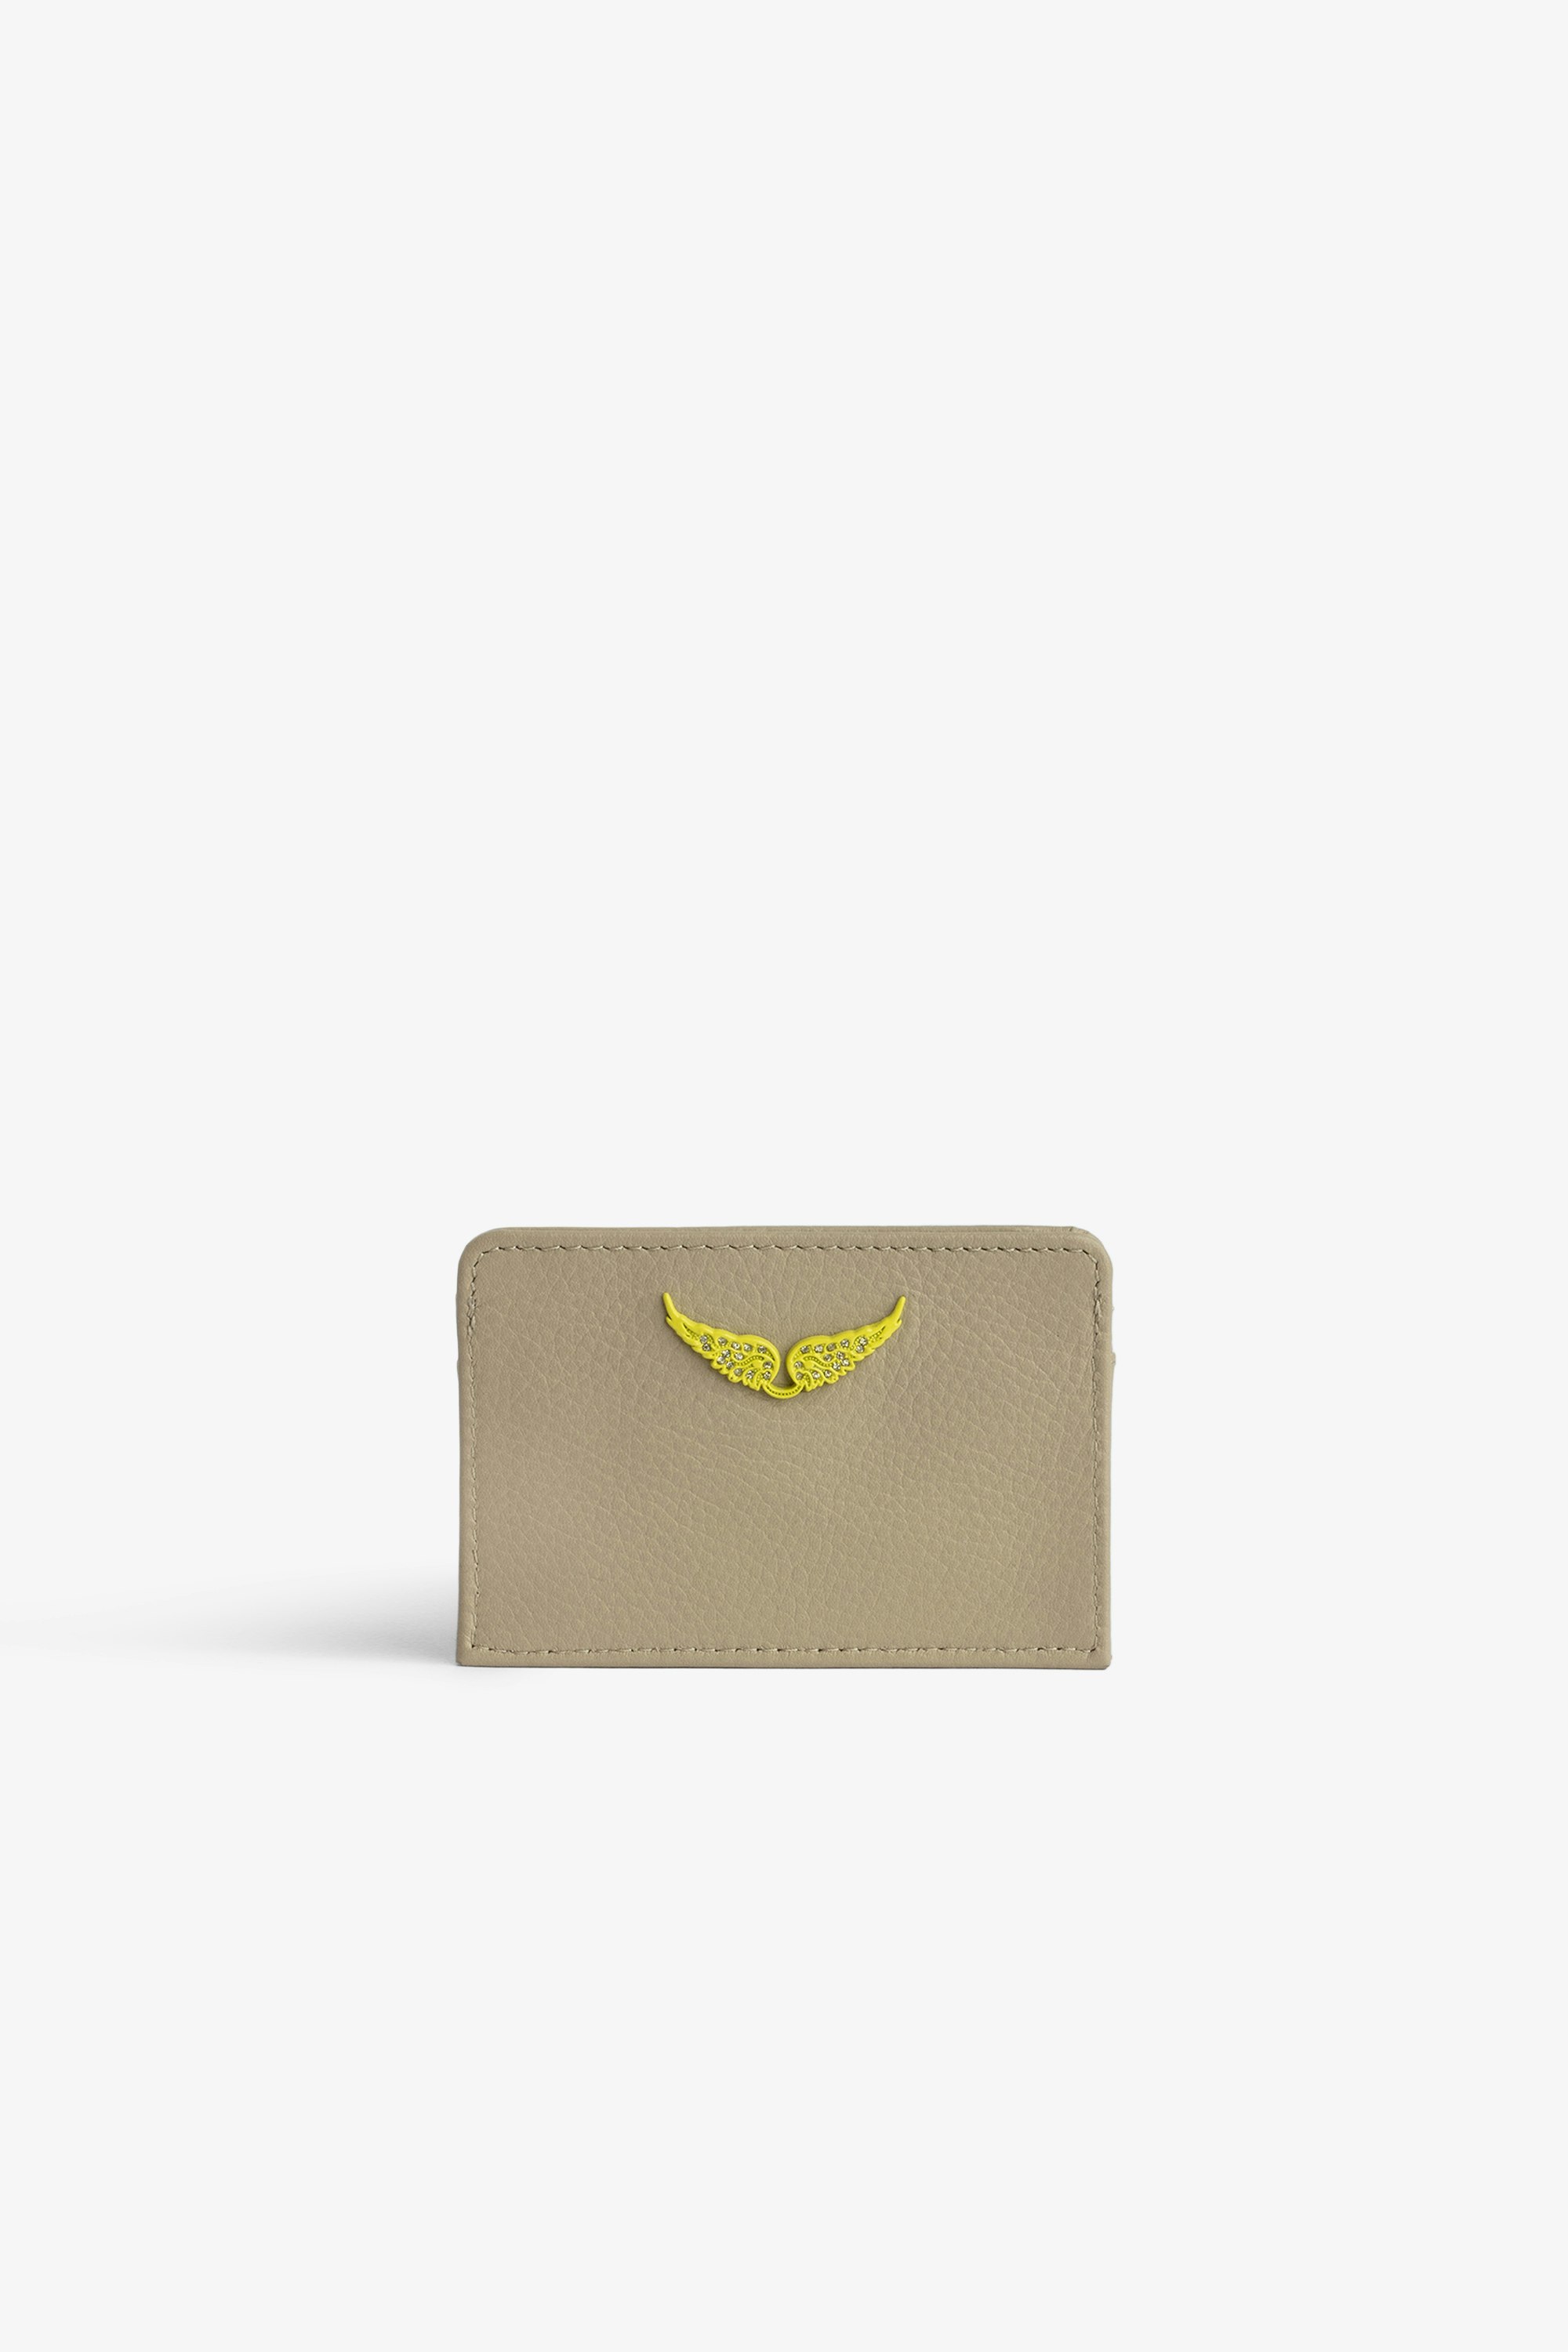 ZV Pass Card Case Women’s card holder in beige smooth leather with yellow wings